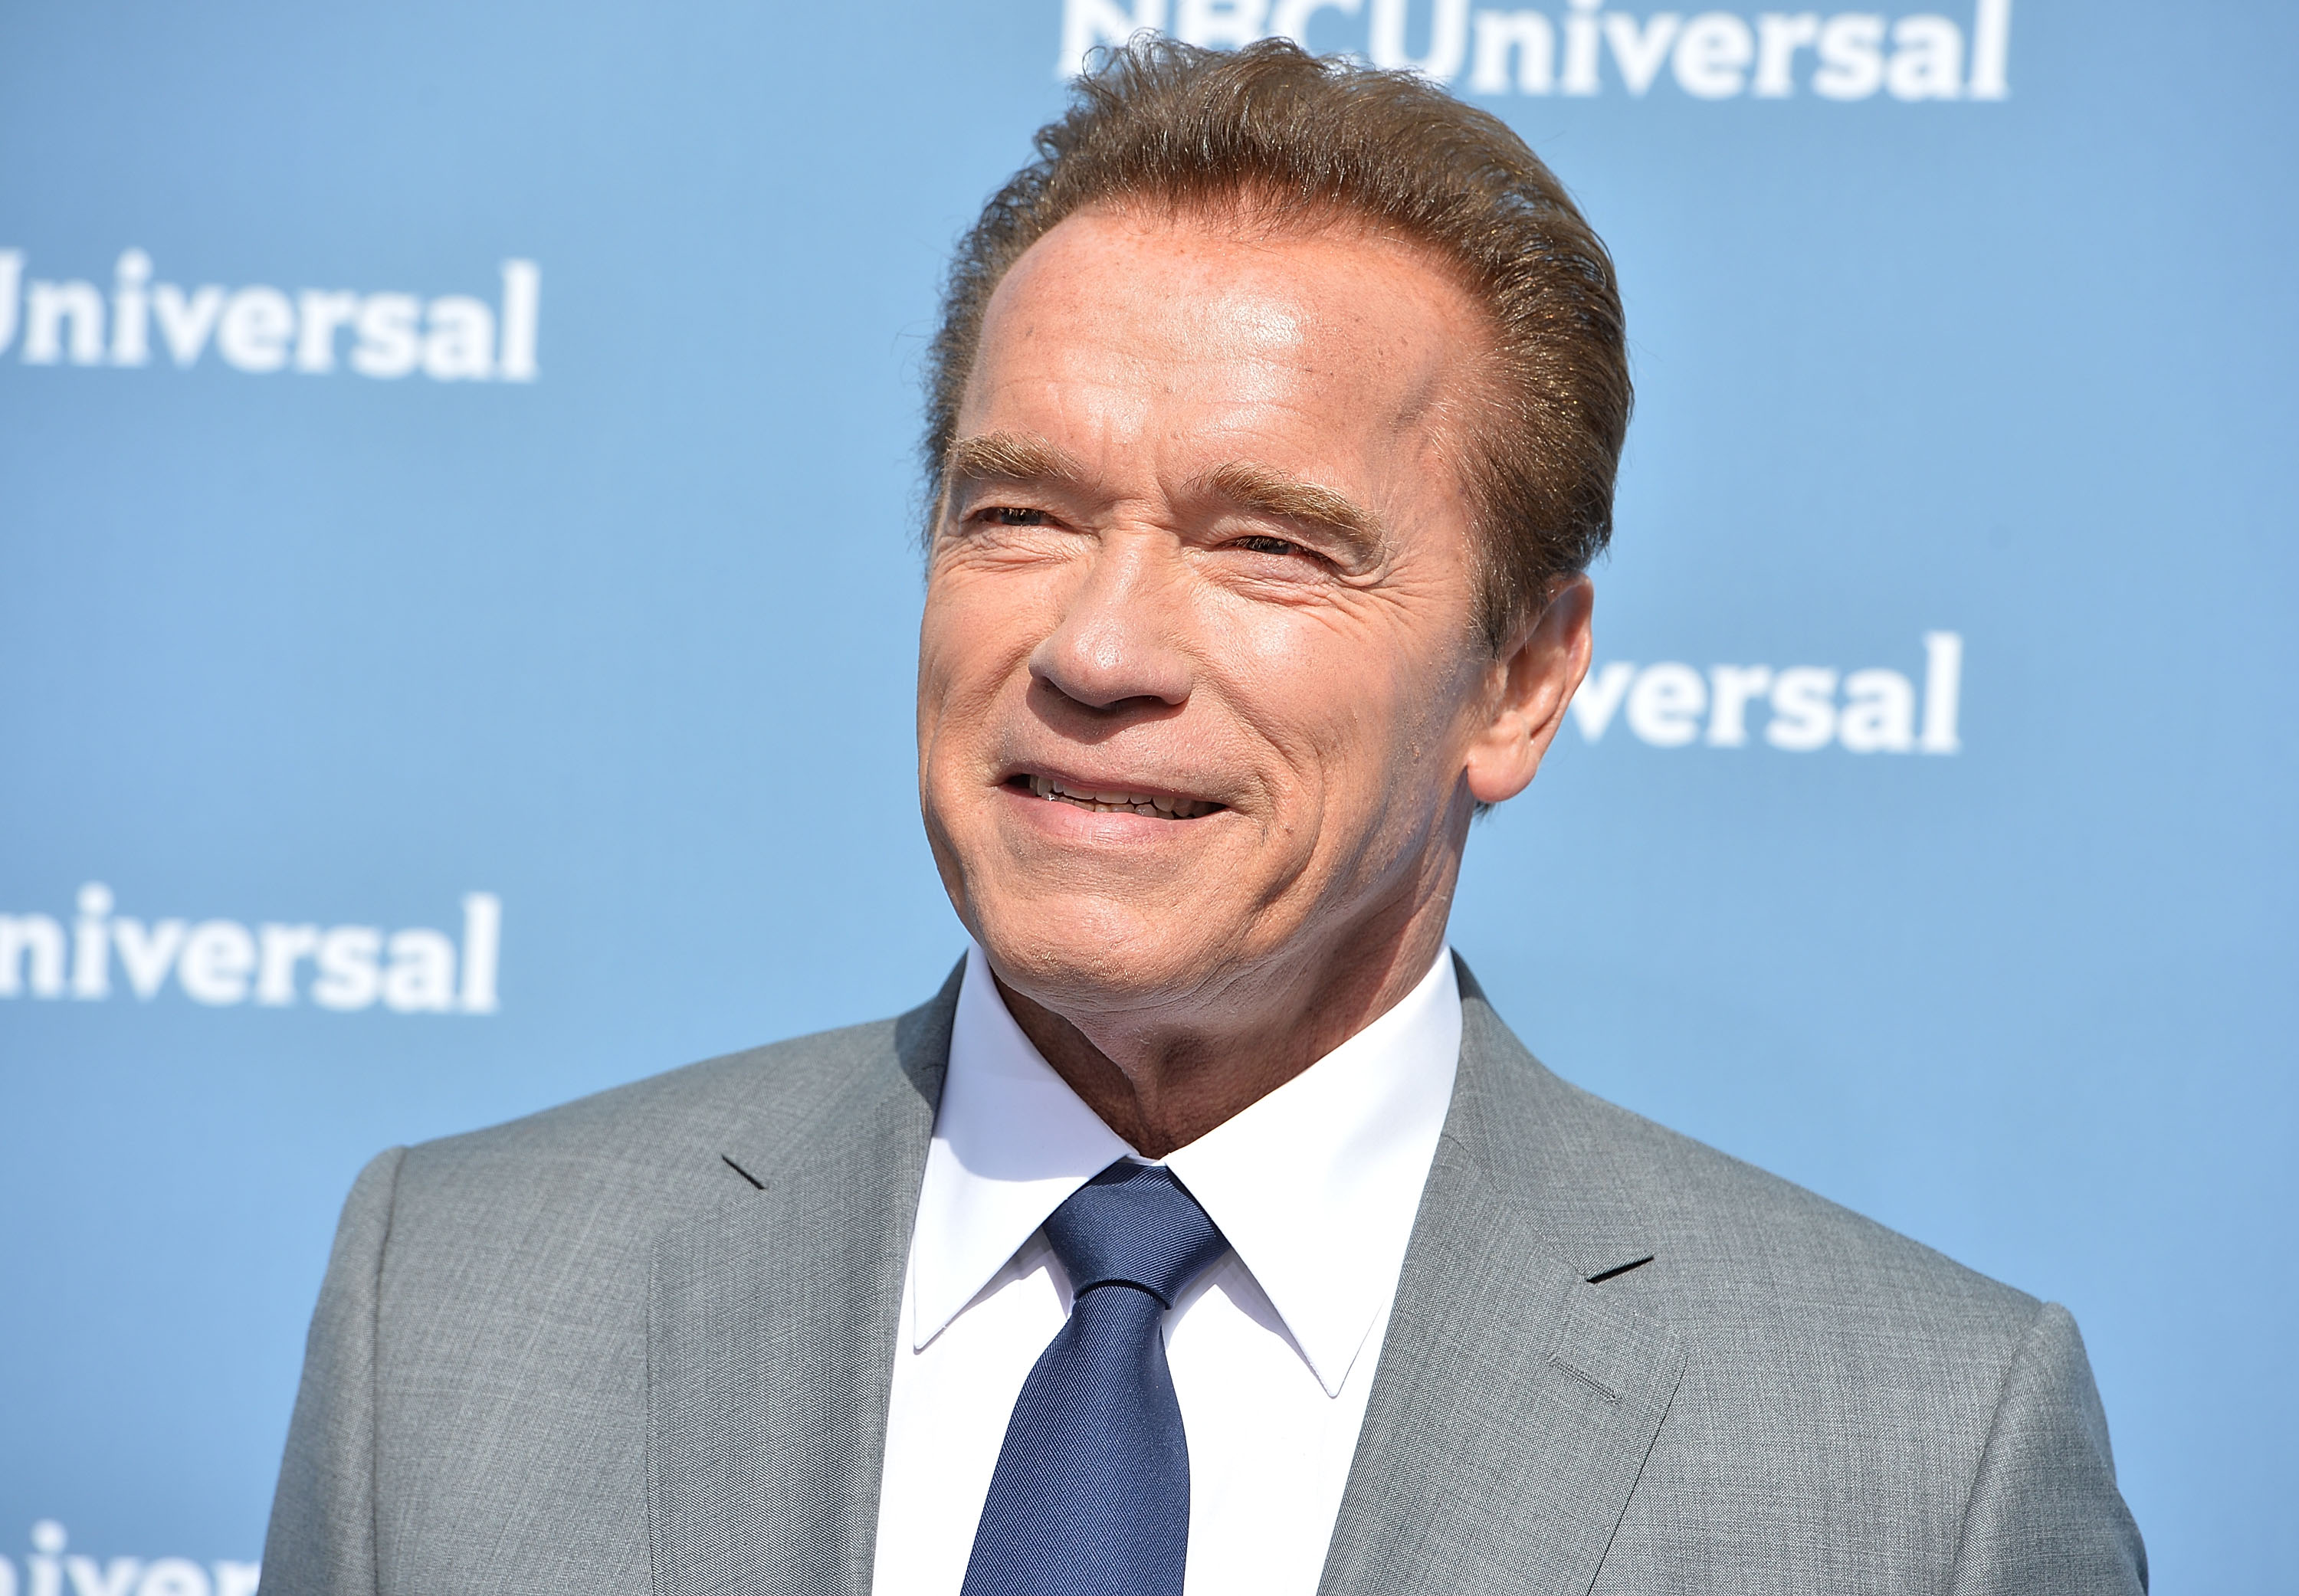 Arnold Schwarzenegger attends the NBCUniversal 2016 Upfront Presentation on May 16, 2016 in New York, New York. (Slaven Vlasic—Getty Images)